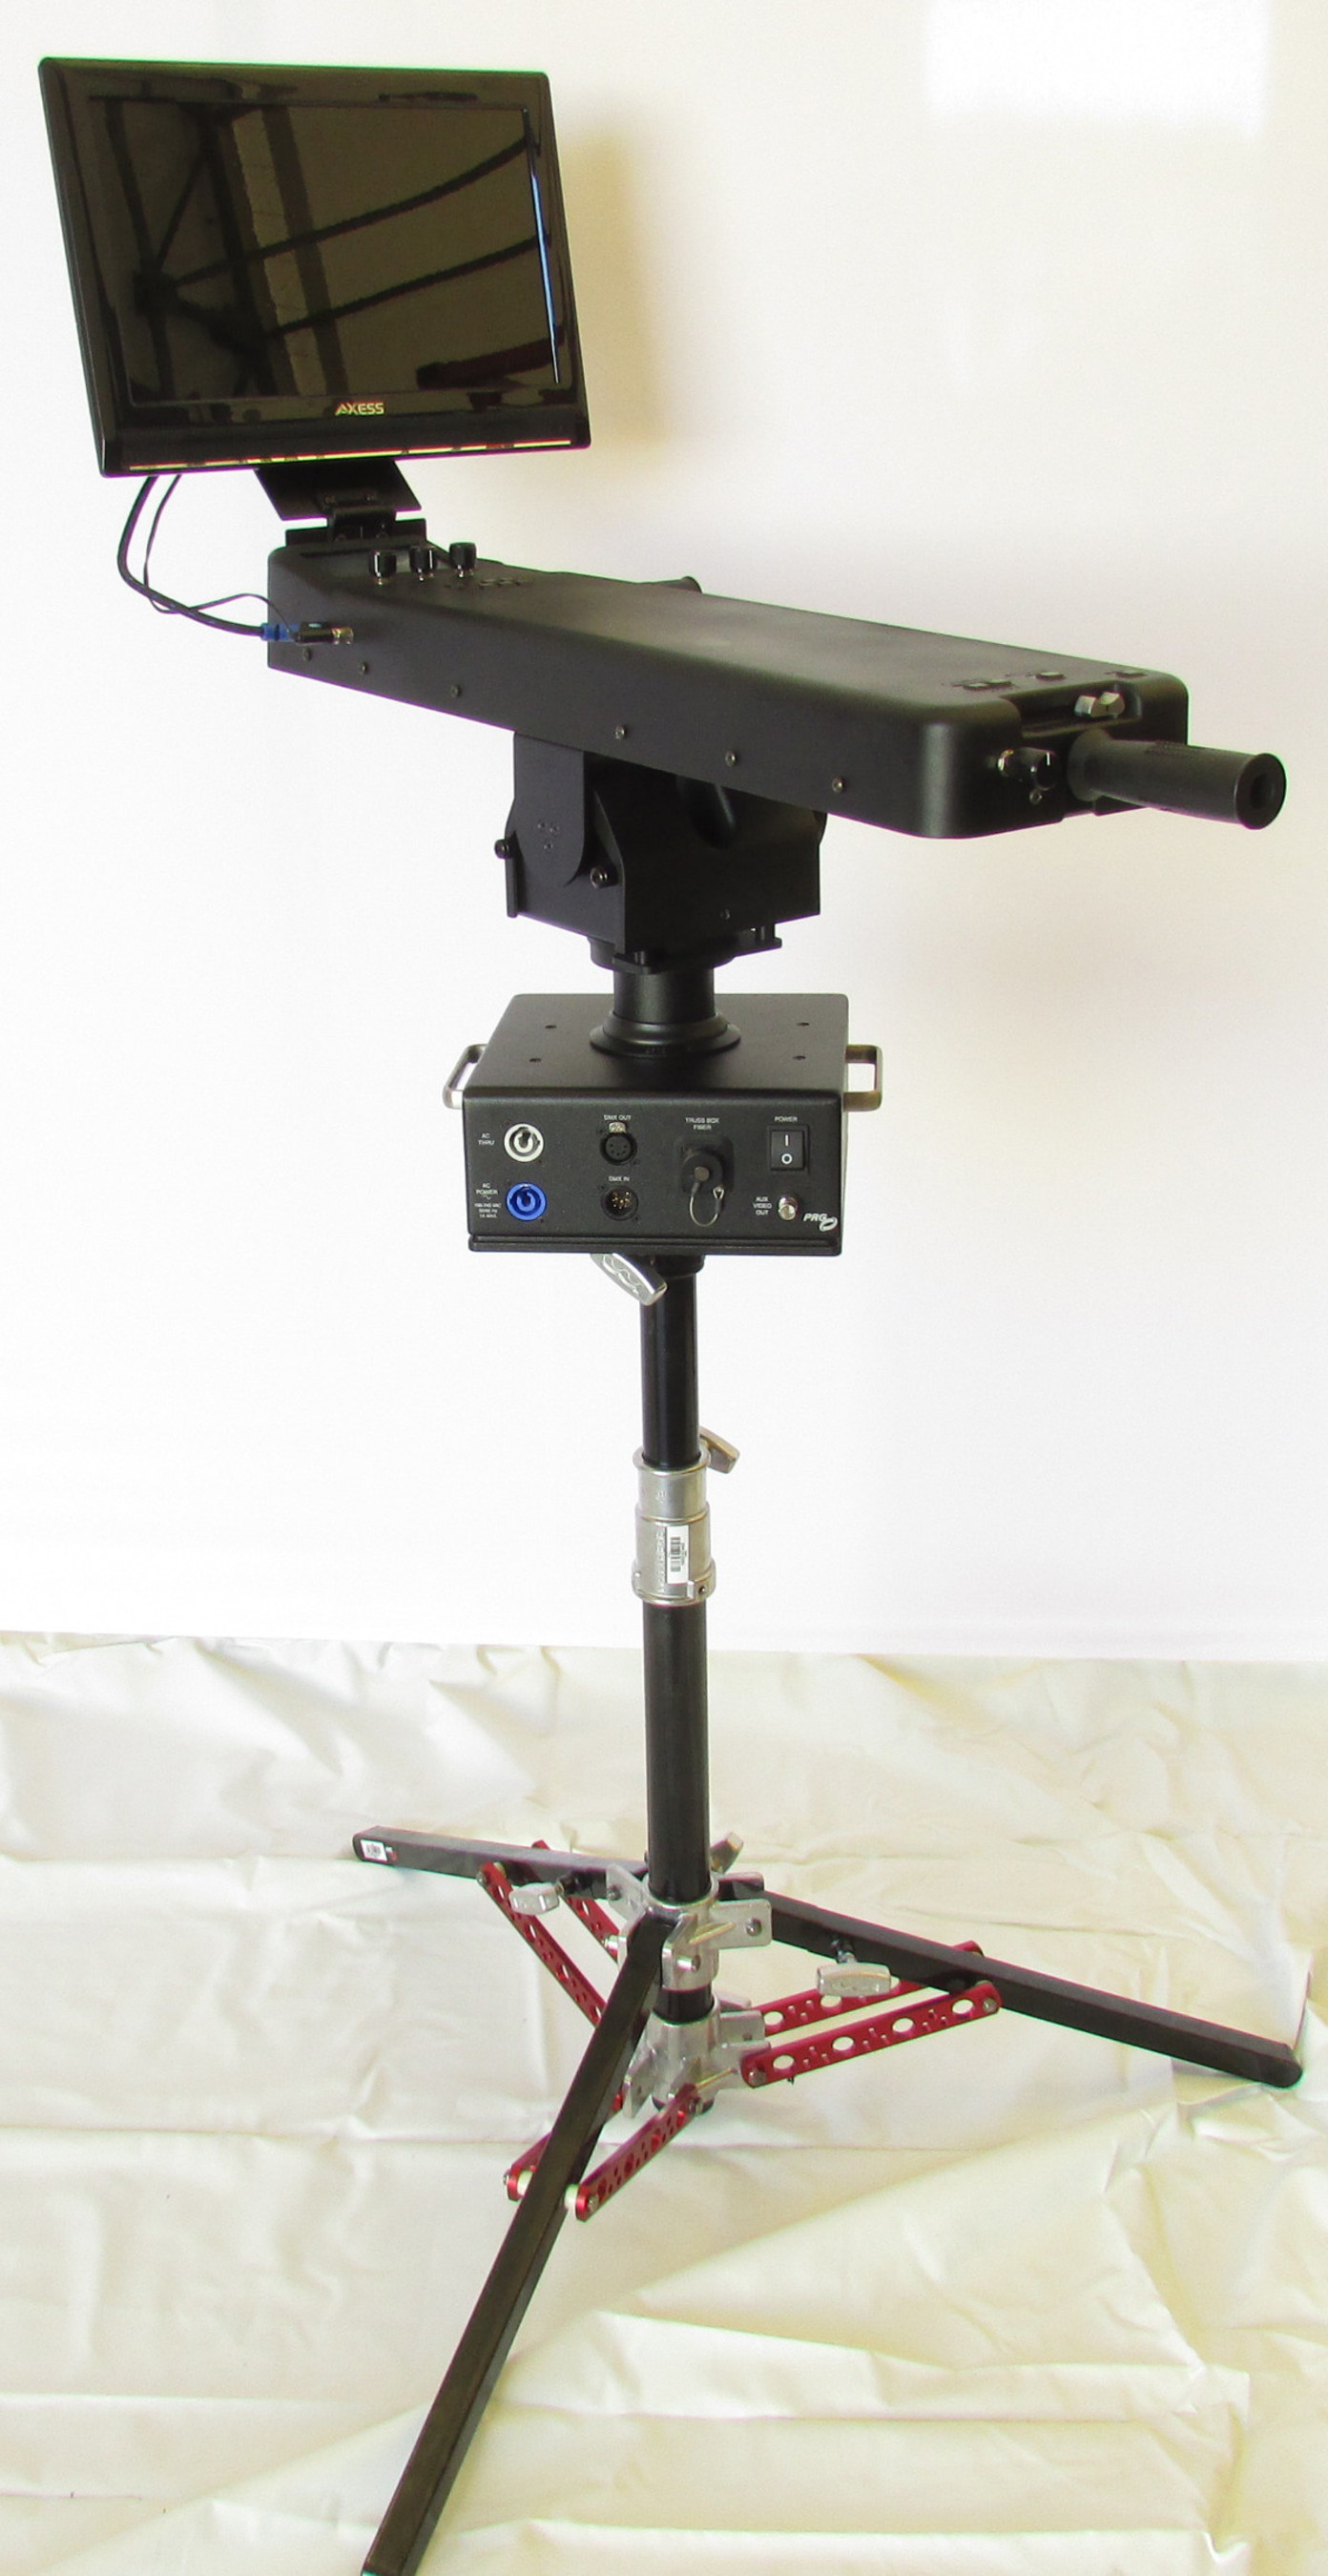 The PRG GroundControl Remote Followspot System allows allows a technician to remotely operate a high output automated luminaire as a followspot from up to 2,000' away. Designers now have total creative freedom to put followspots in places that were either previously unusable or involved complex rigging.